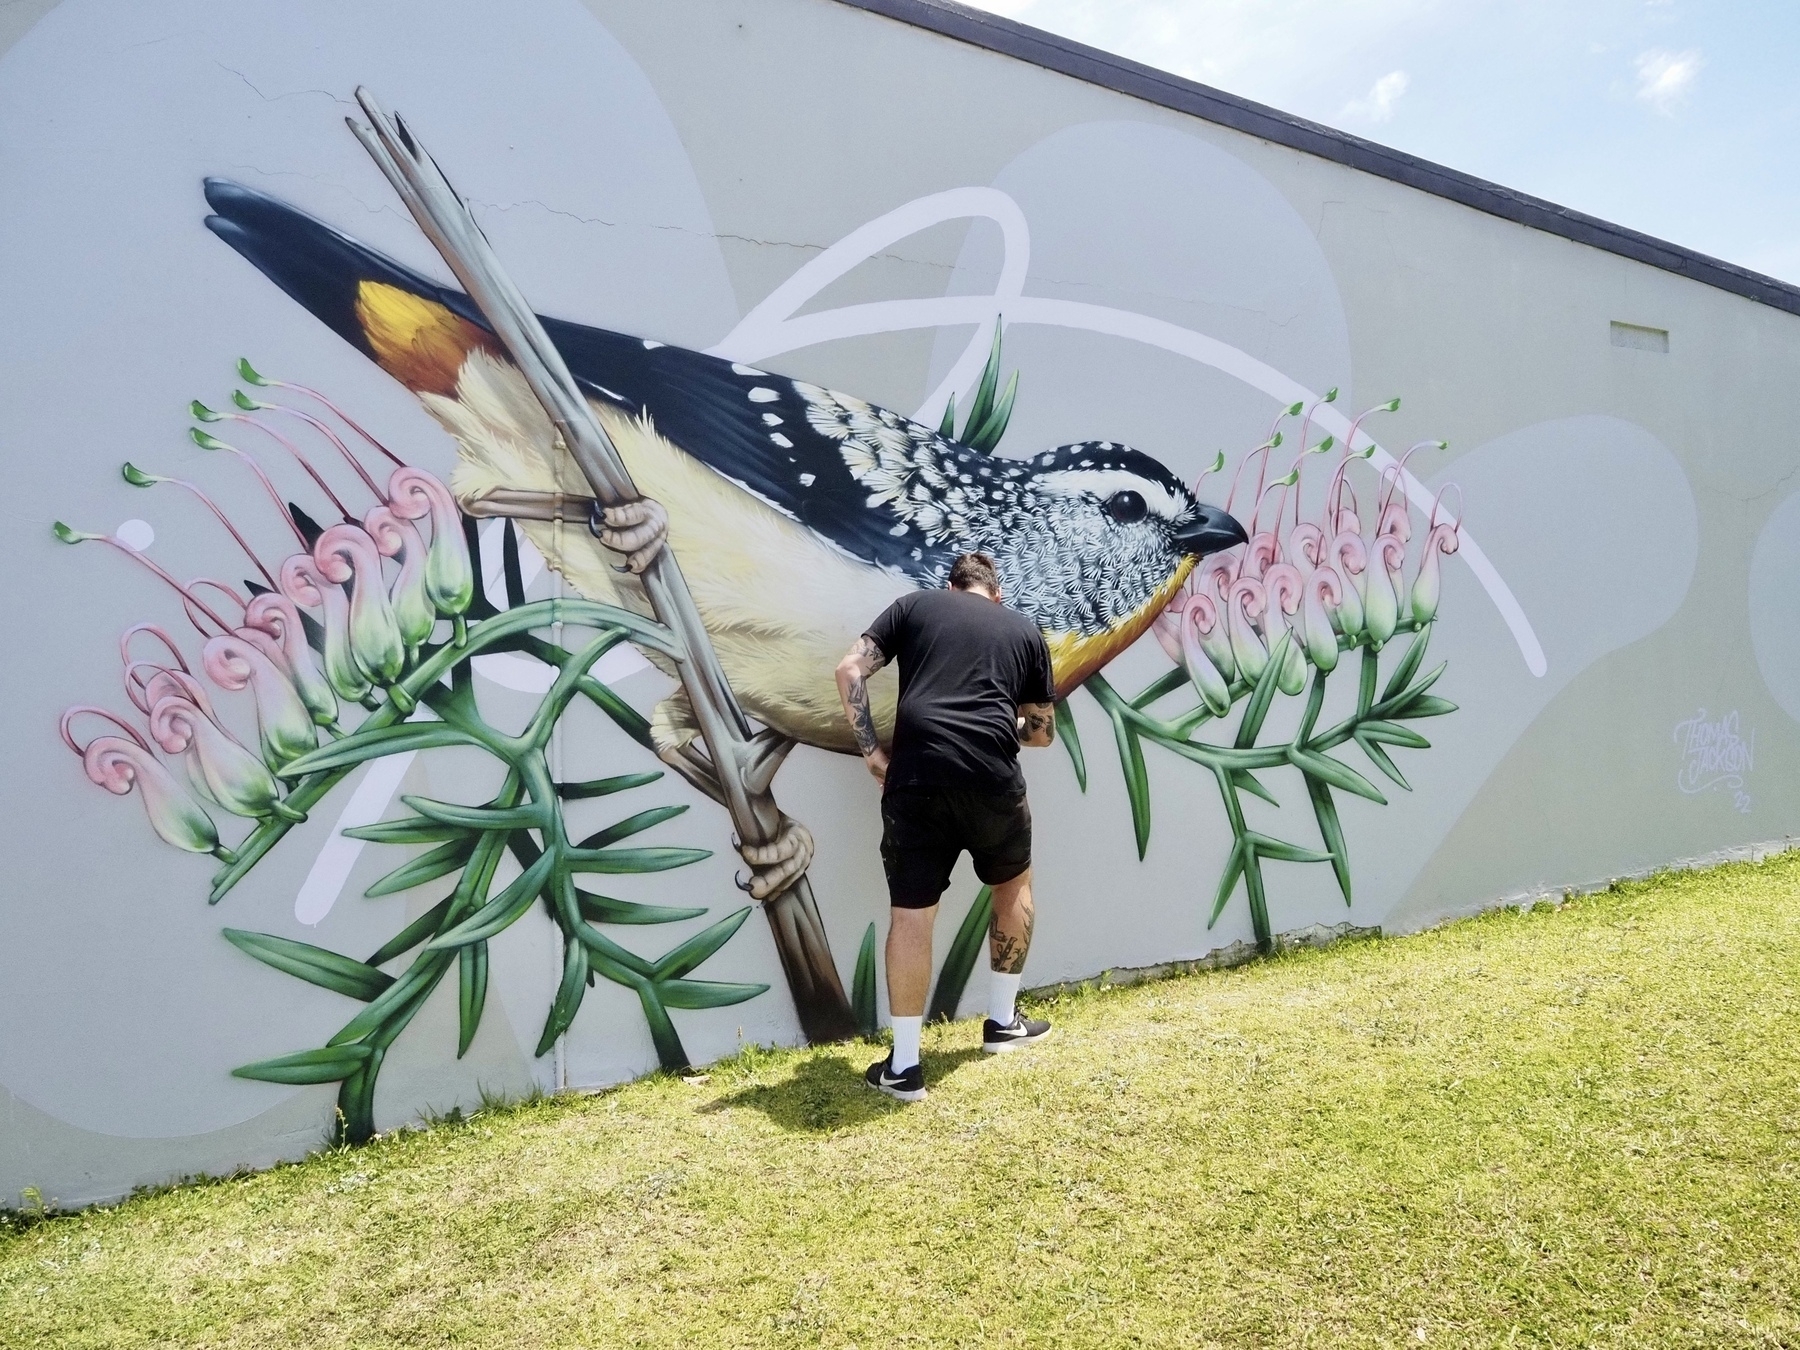 A street artist paints a picture of a bird on a branch.